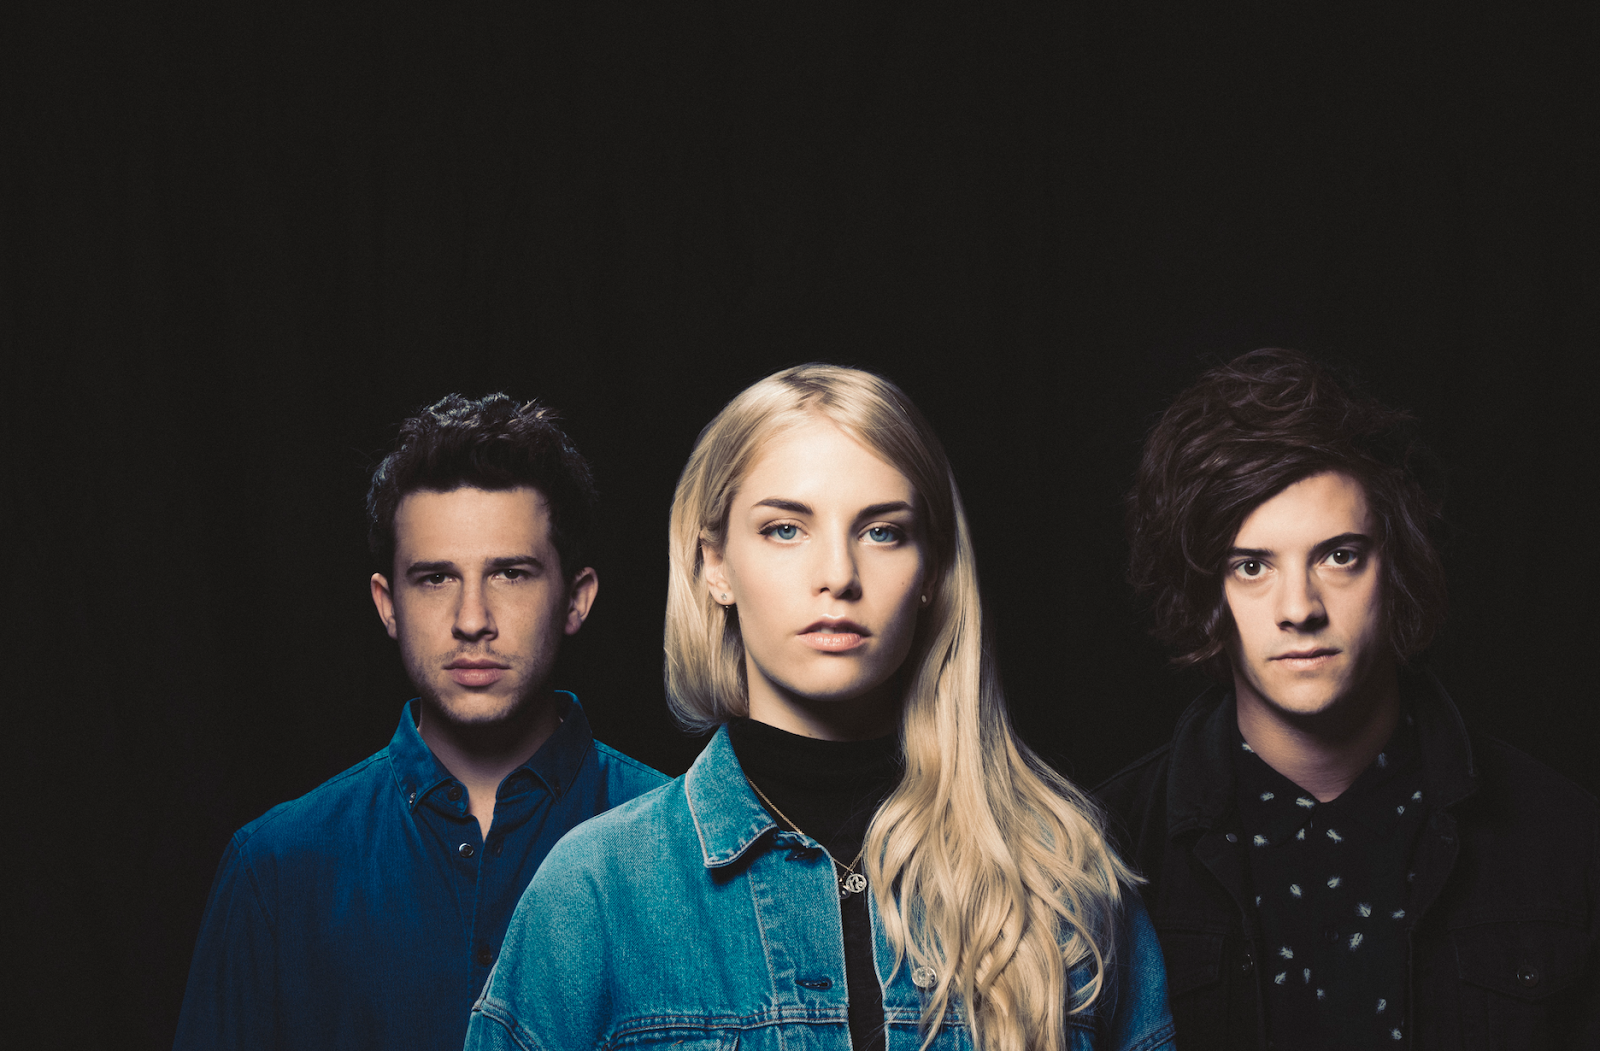 London Grammar release remixes, including reworks by Tiga and Marc Kinchen AKA MK.